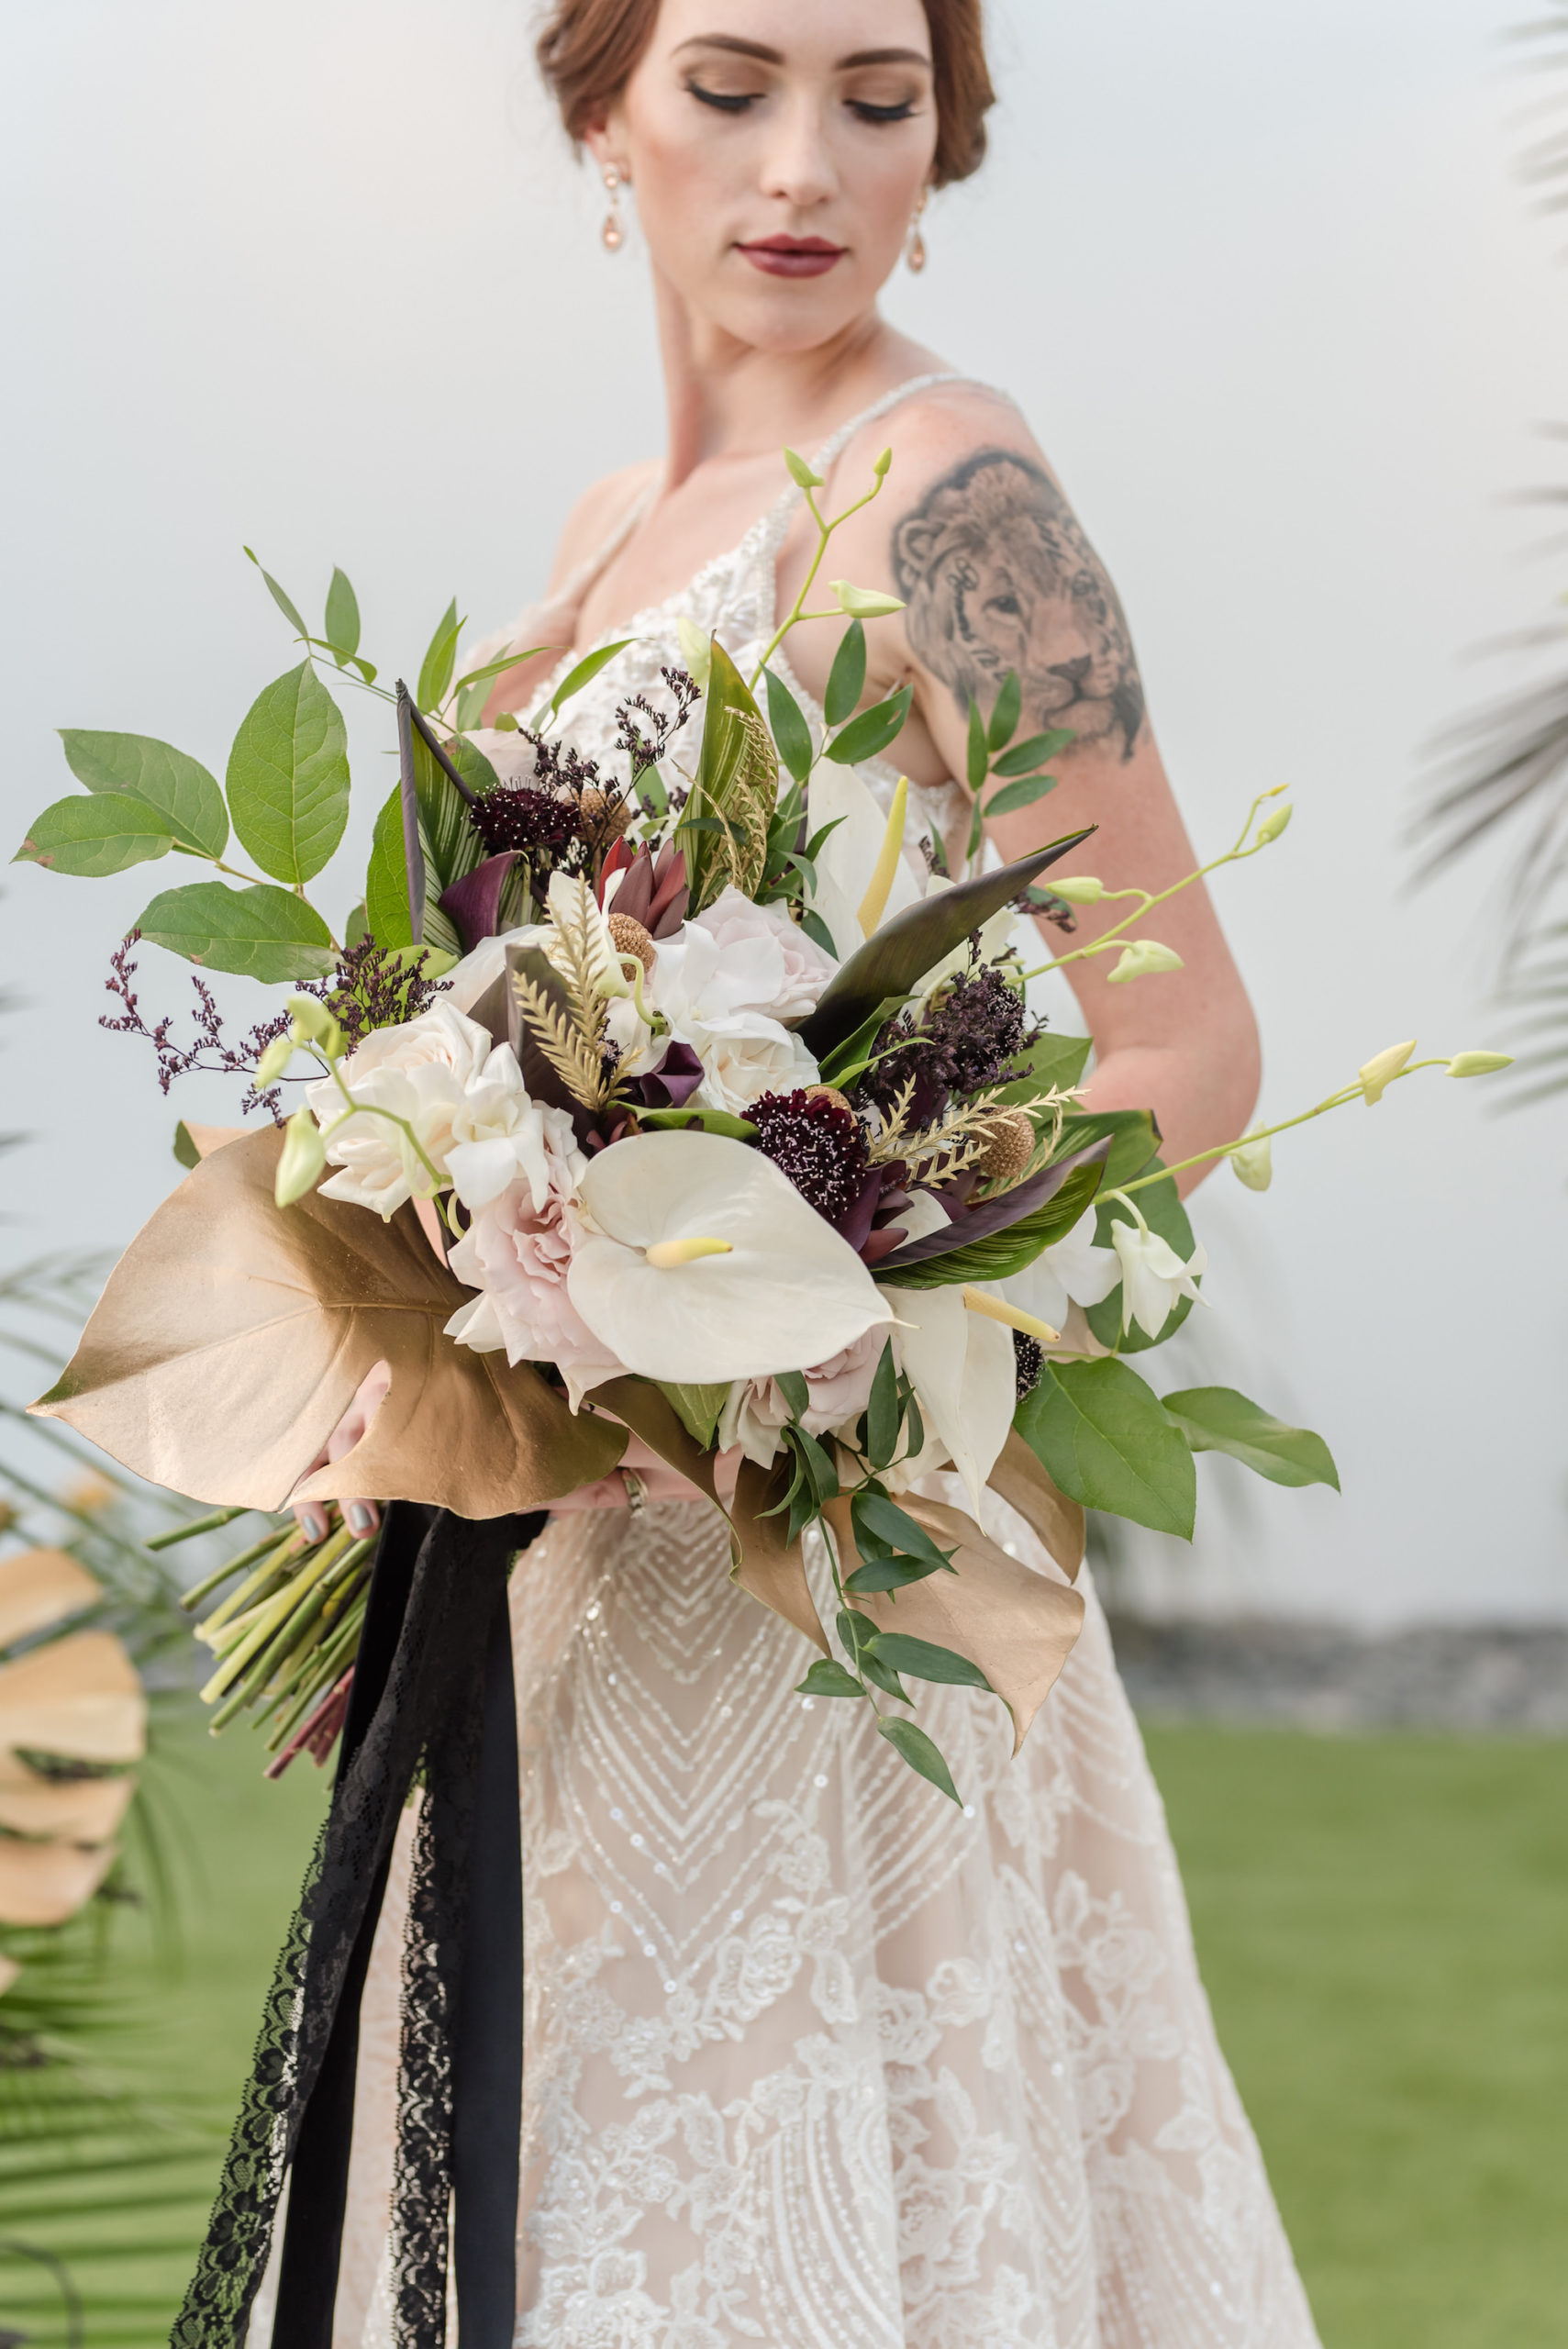 Dark Luxe, Romantic Styled Wedding Shoot, Bride in Beaded Lace with Nude Lining Holding White Cala Lilly, Blush Pink Roses, Gold Palm Leaves, Greenery, and Purple Flowers Bouquet | Tampa Bay Wedding Planner Elegant Affairs by Design